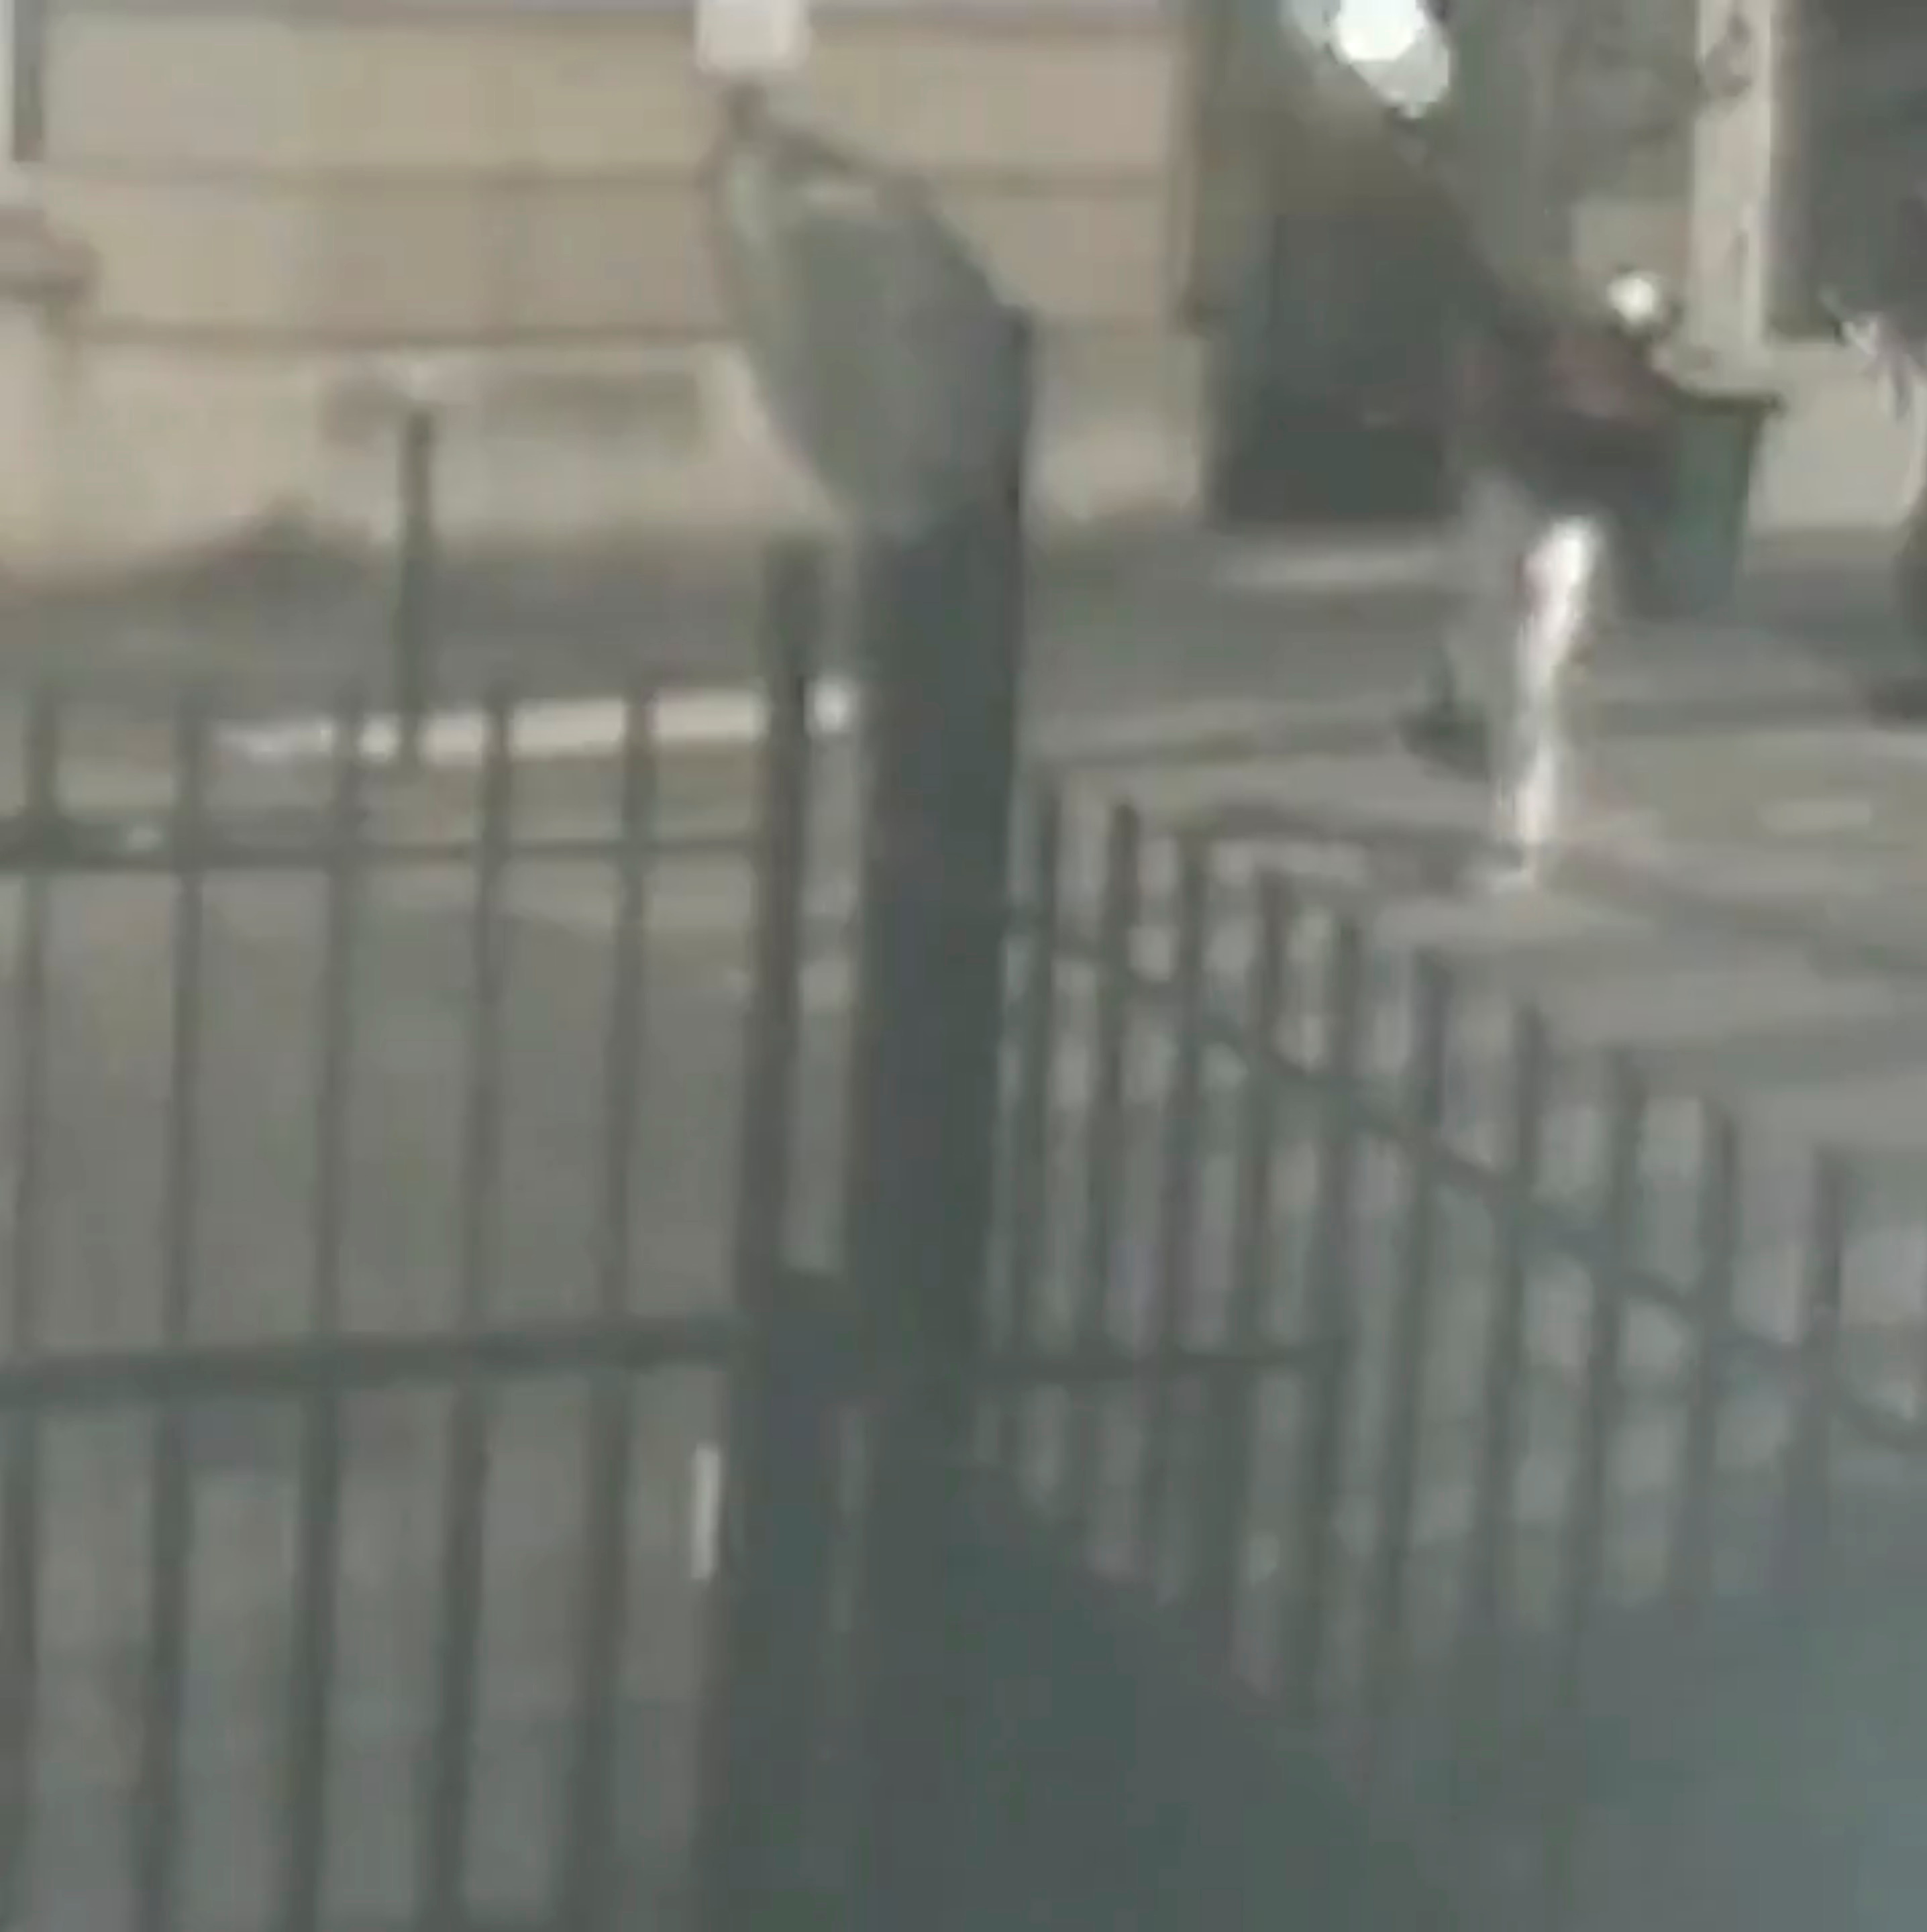 A person throws a petrol bomb at the Cuban embassy in Paris, France July 26, 2021, in this screen grab obtained from a video. Video recorded July 26, 2021. TWITTER @CUBAMINIREX/Handout via REUTERS